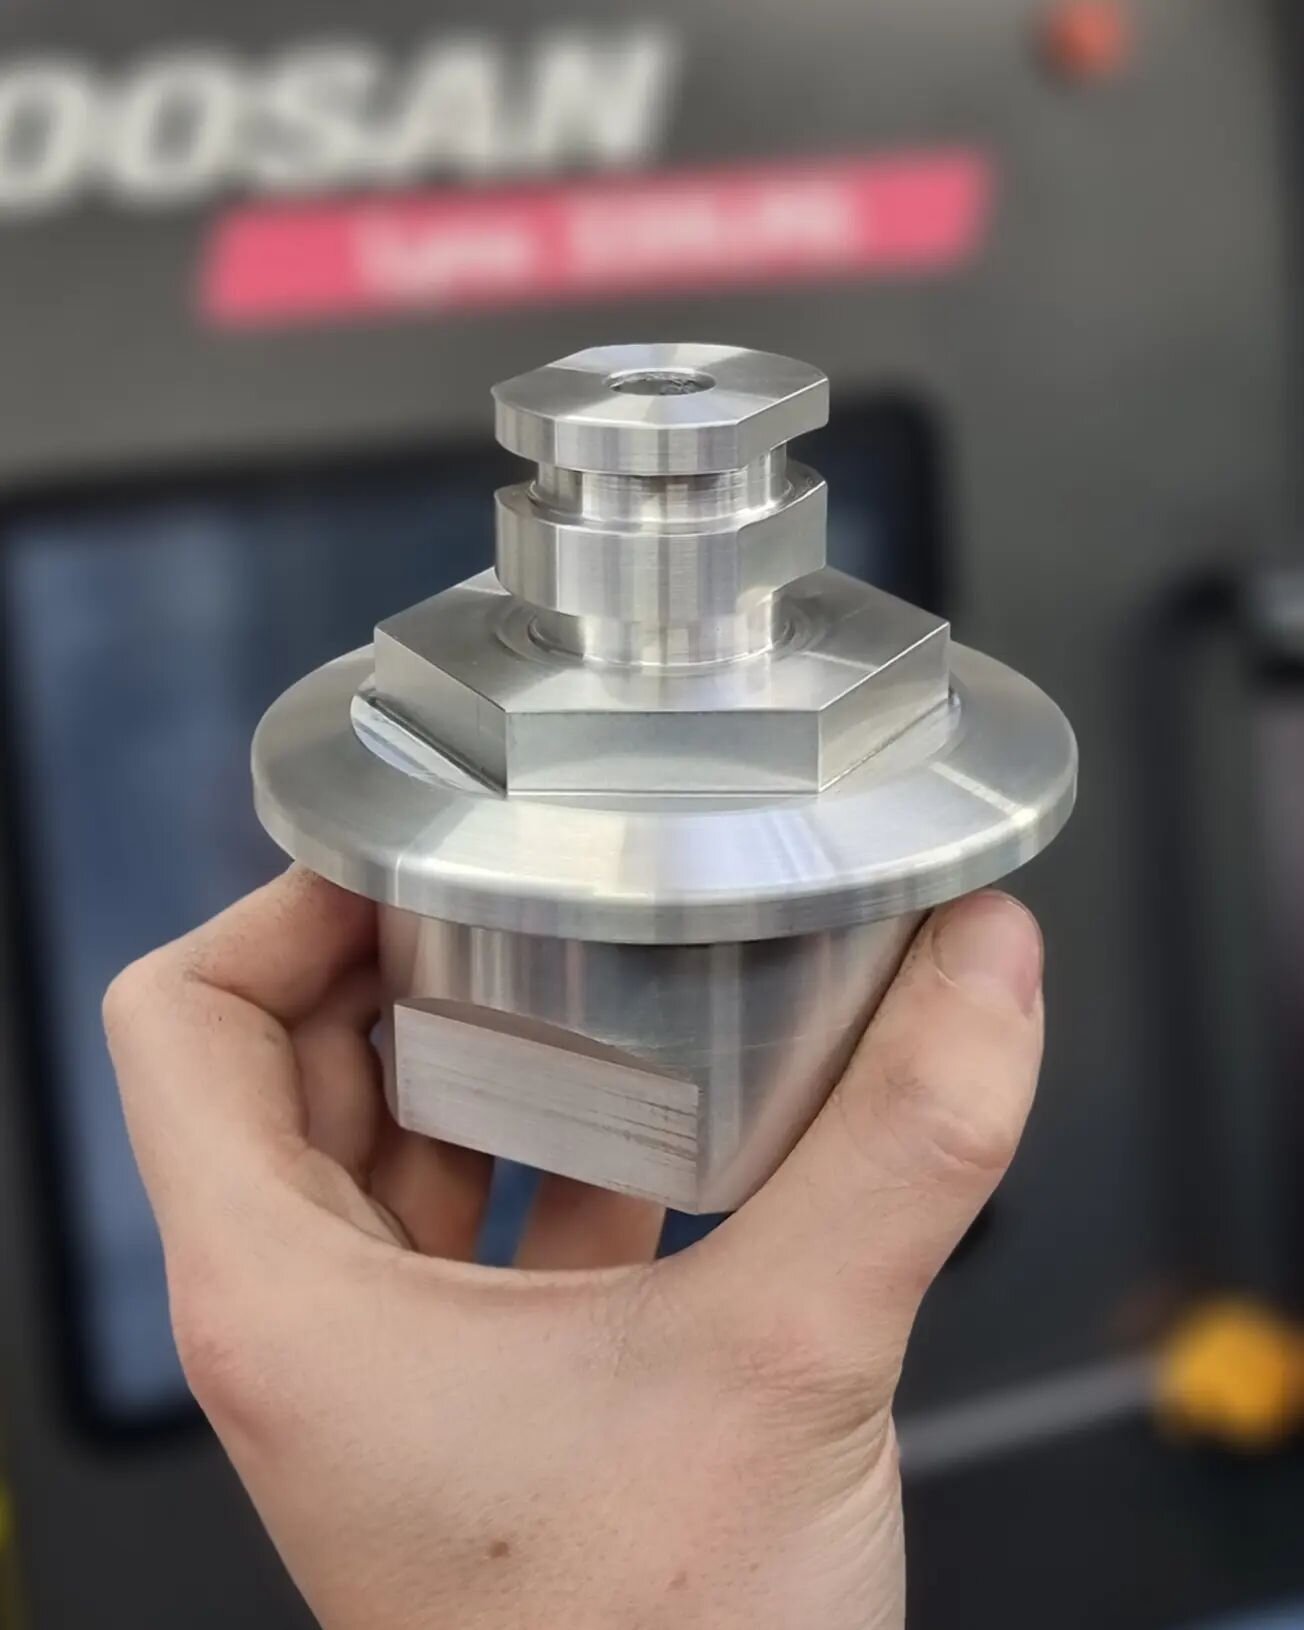 Director: &quot;Get that on the Instagram its bloody gorgeous&quot; 🤣🤣

#cncmachining #milling #britishmanufacturing&nbsp; #cncmilling #fanuccnc #cncmachinist #cnc #drilling #promacprecision #carbidetools #cutwell #cnc #drilling #millingmachine #pr